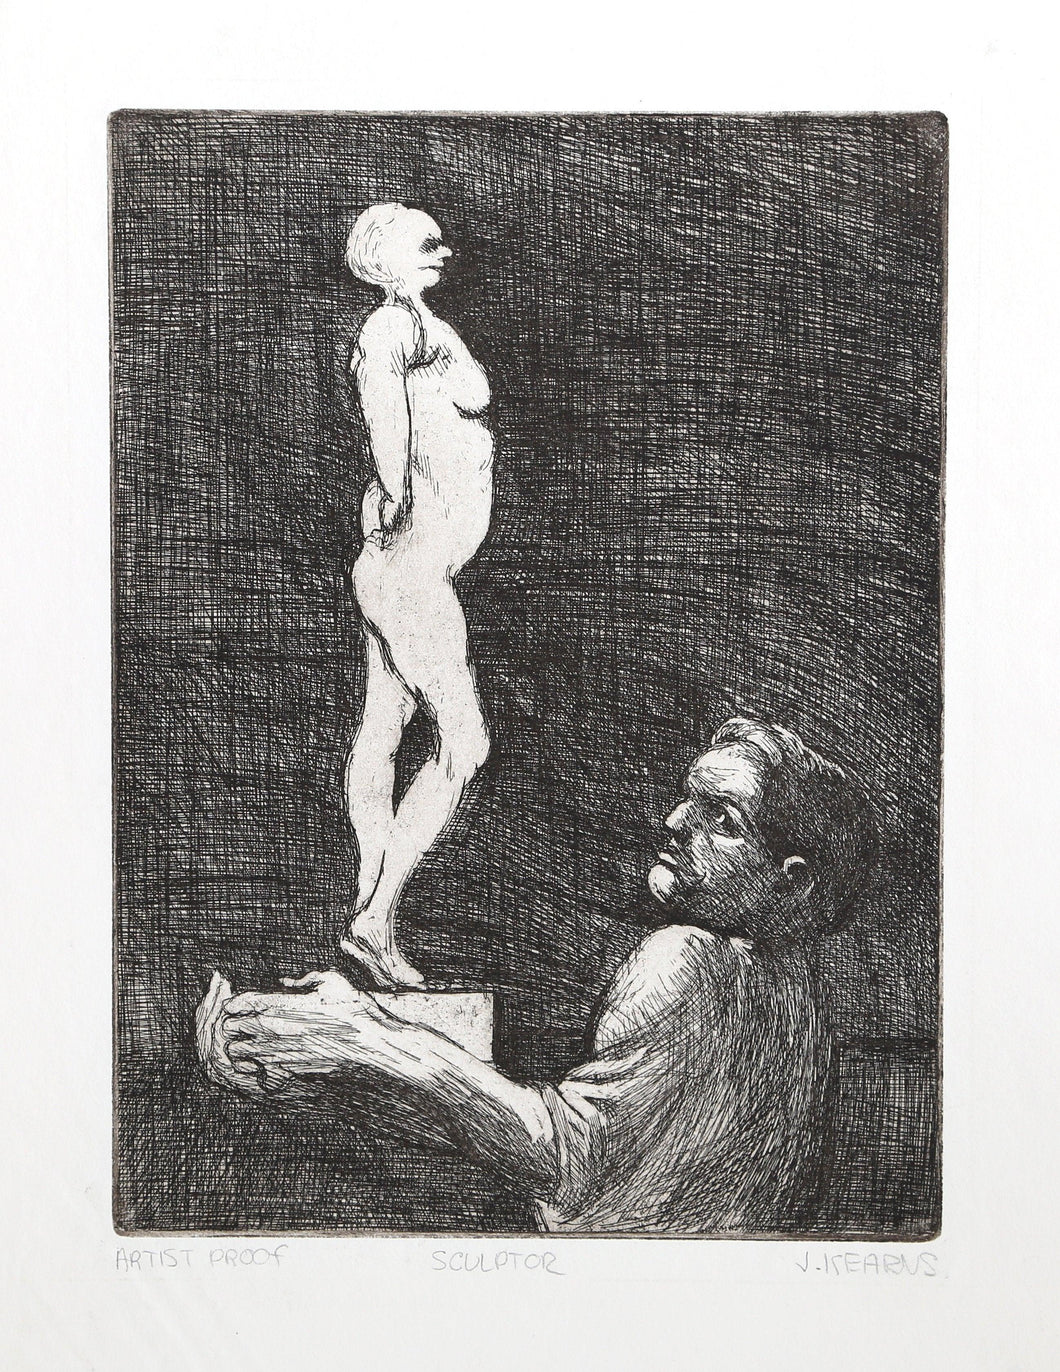 Sculptor Etching | James Kearns,{{product.type}}